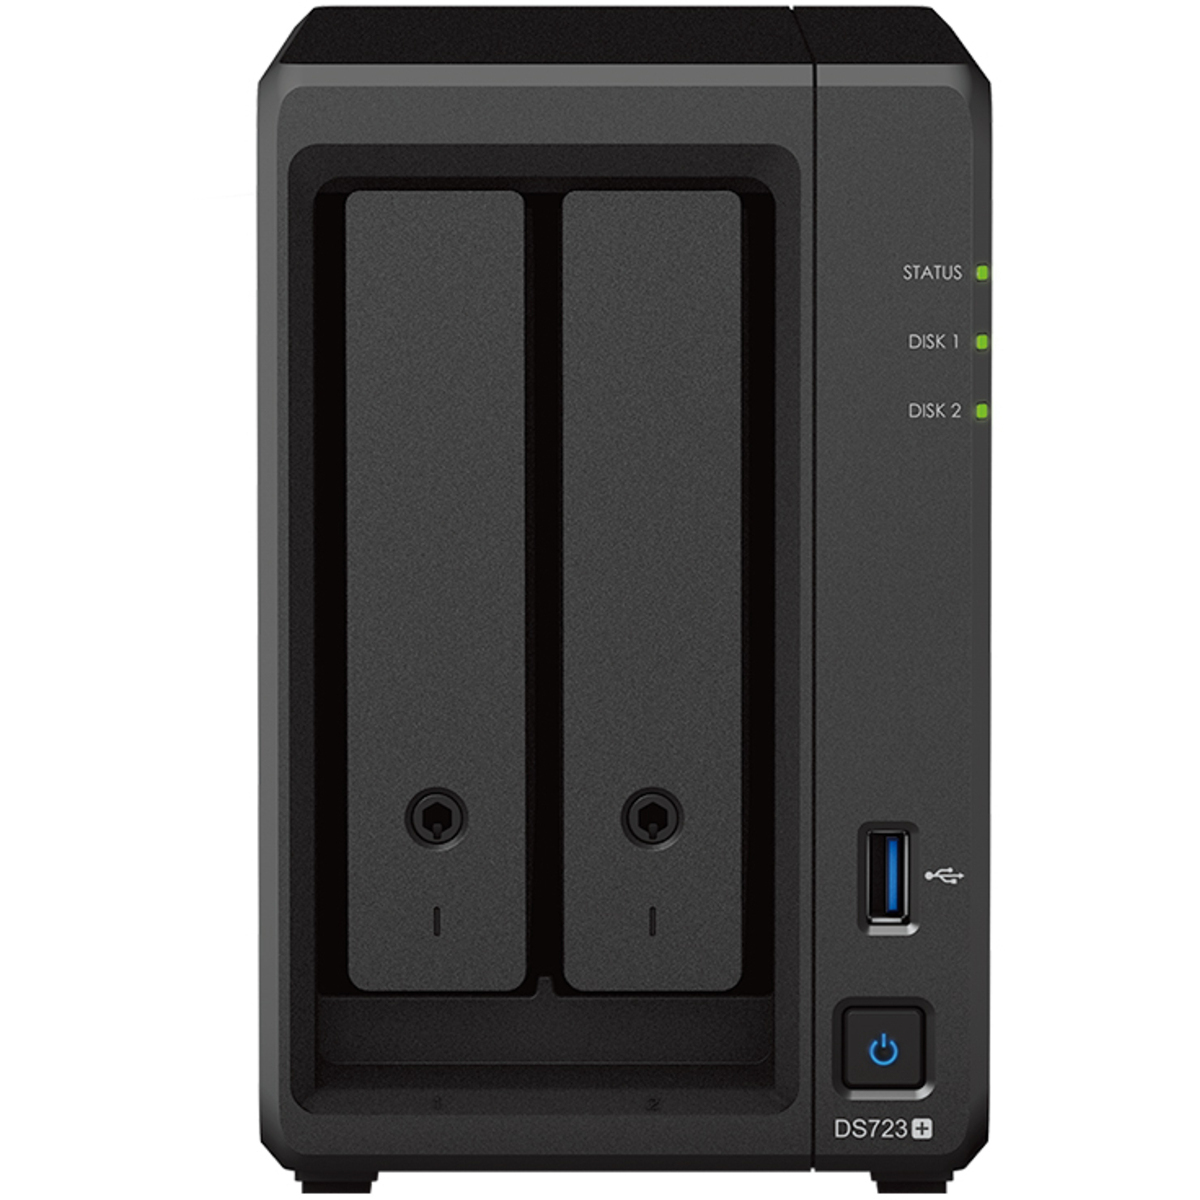 Synology DiskStation DS723+ 12tb 2-Bay Desktop Multimedia / Power User / Business NAS - Network Attached Storage Device 2x6tb Seagate IronWolf ST6000VN006 3.5 5400rpm SATA 6Gb/s HDD NAS Class Drives Installed - Burn-In Tested DiskStation DS723+